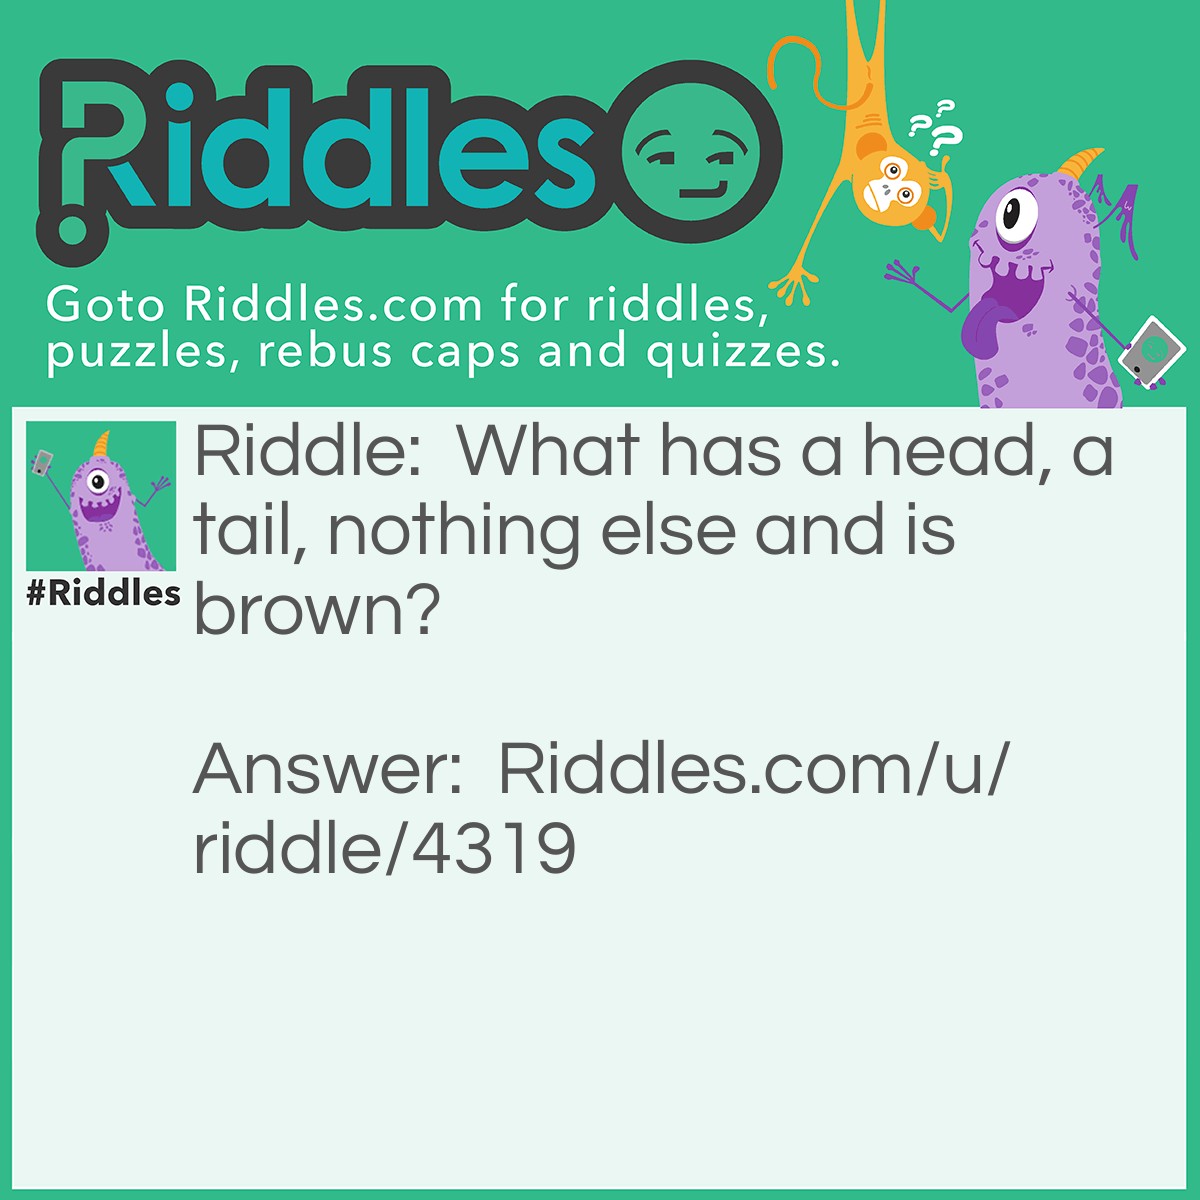 Riddle: What has a head, a tail, nothing else and is brown? Answer: A coin.